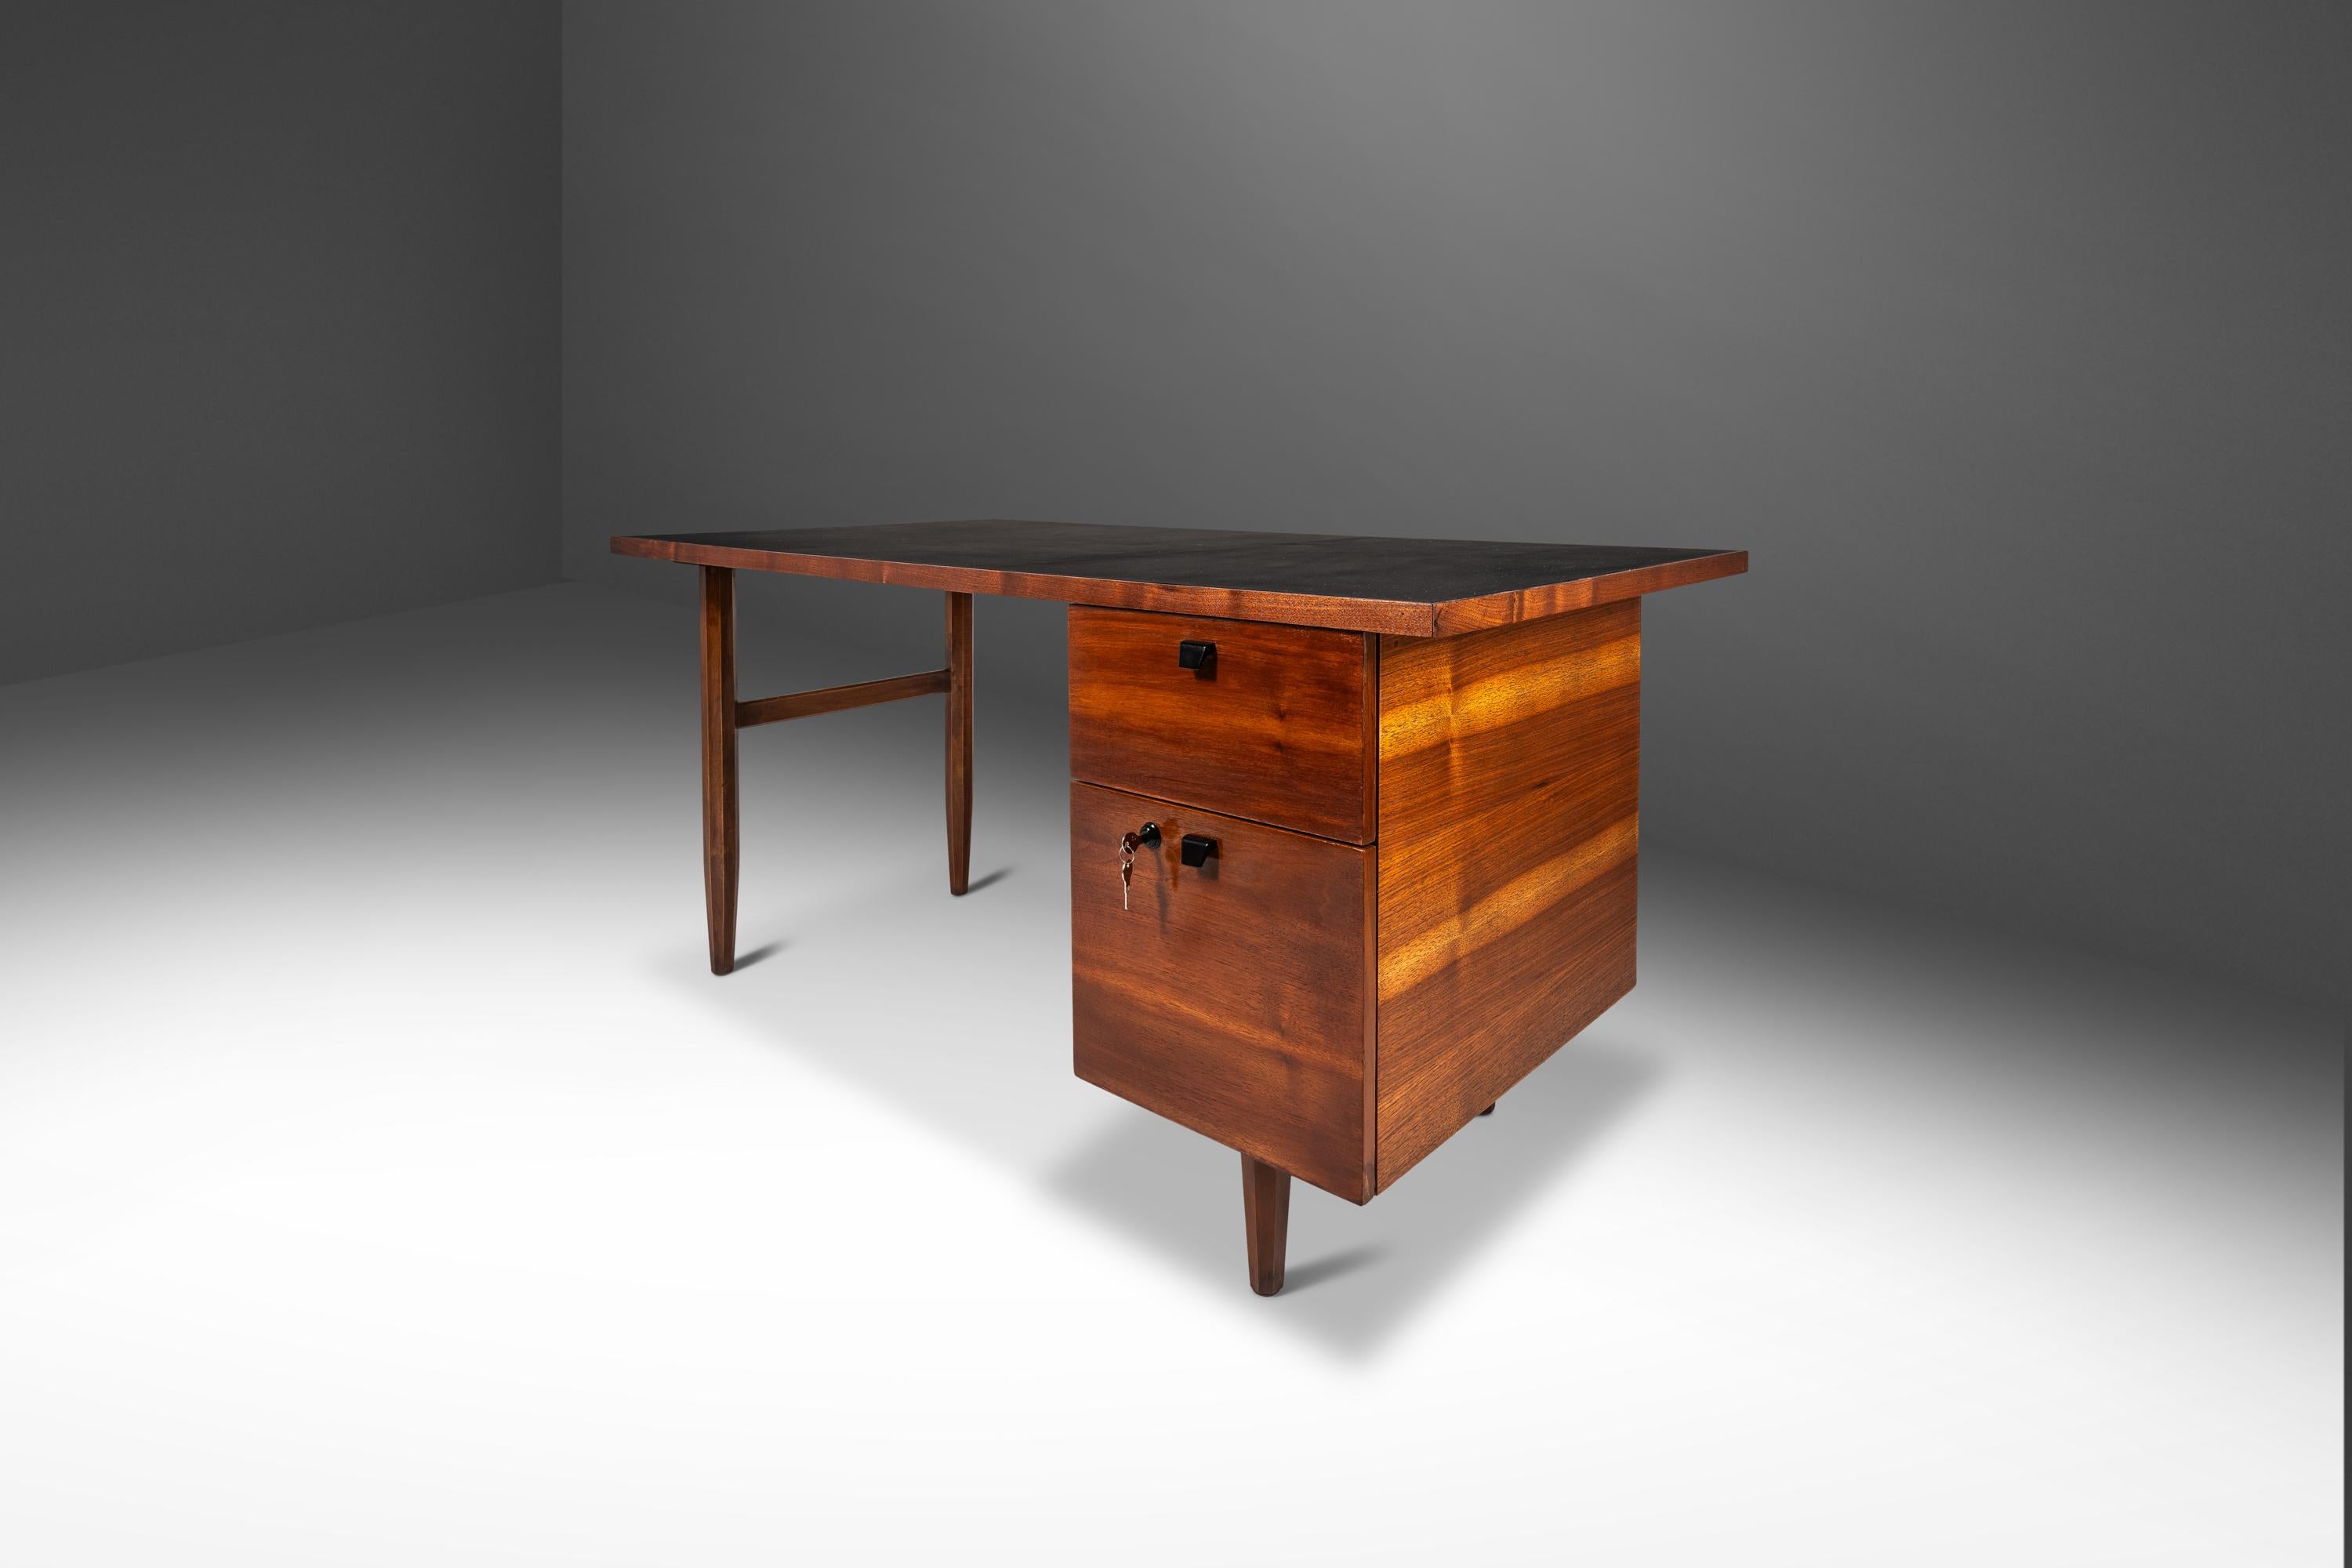 American Restored Mid-Century Modern Writers Desk in Walnut with Leather Top, USA, 1960's For Sale